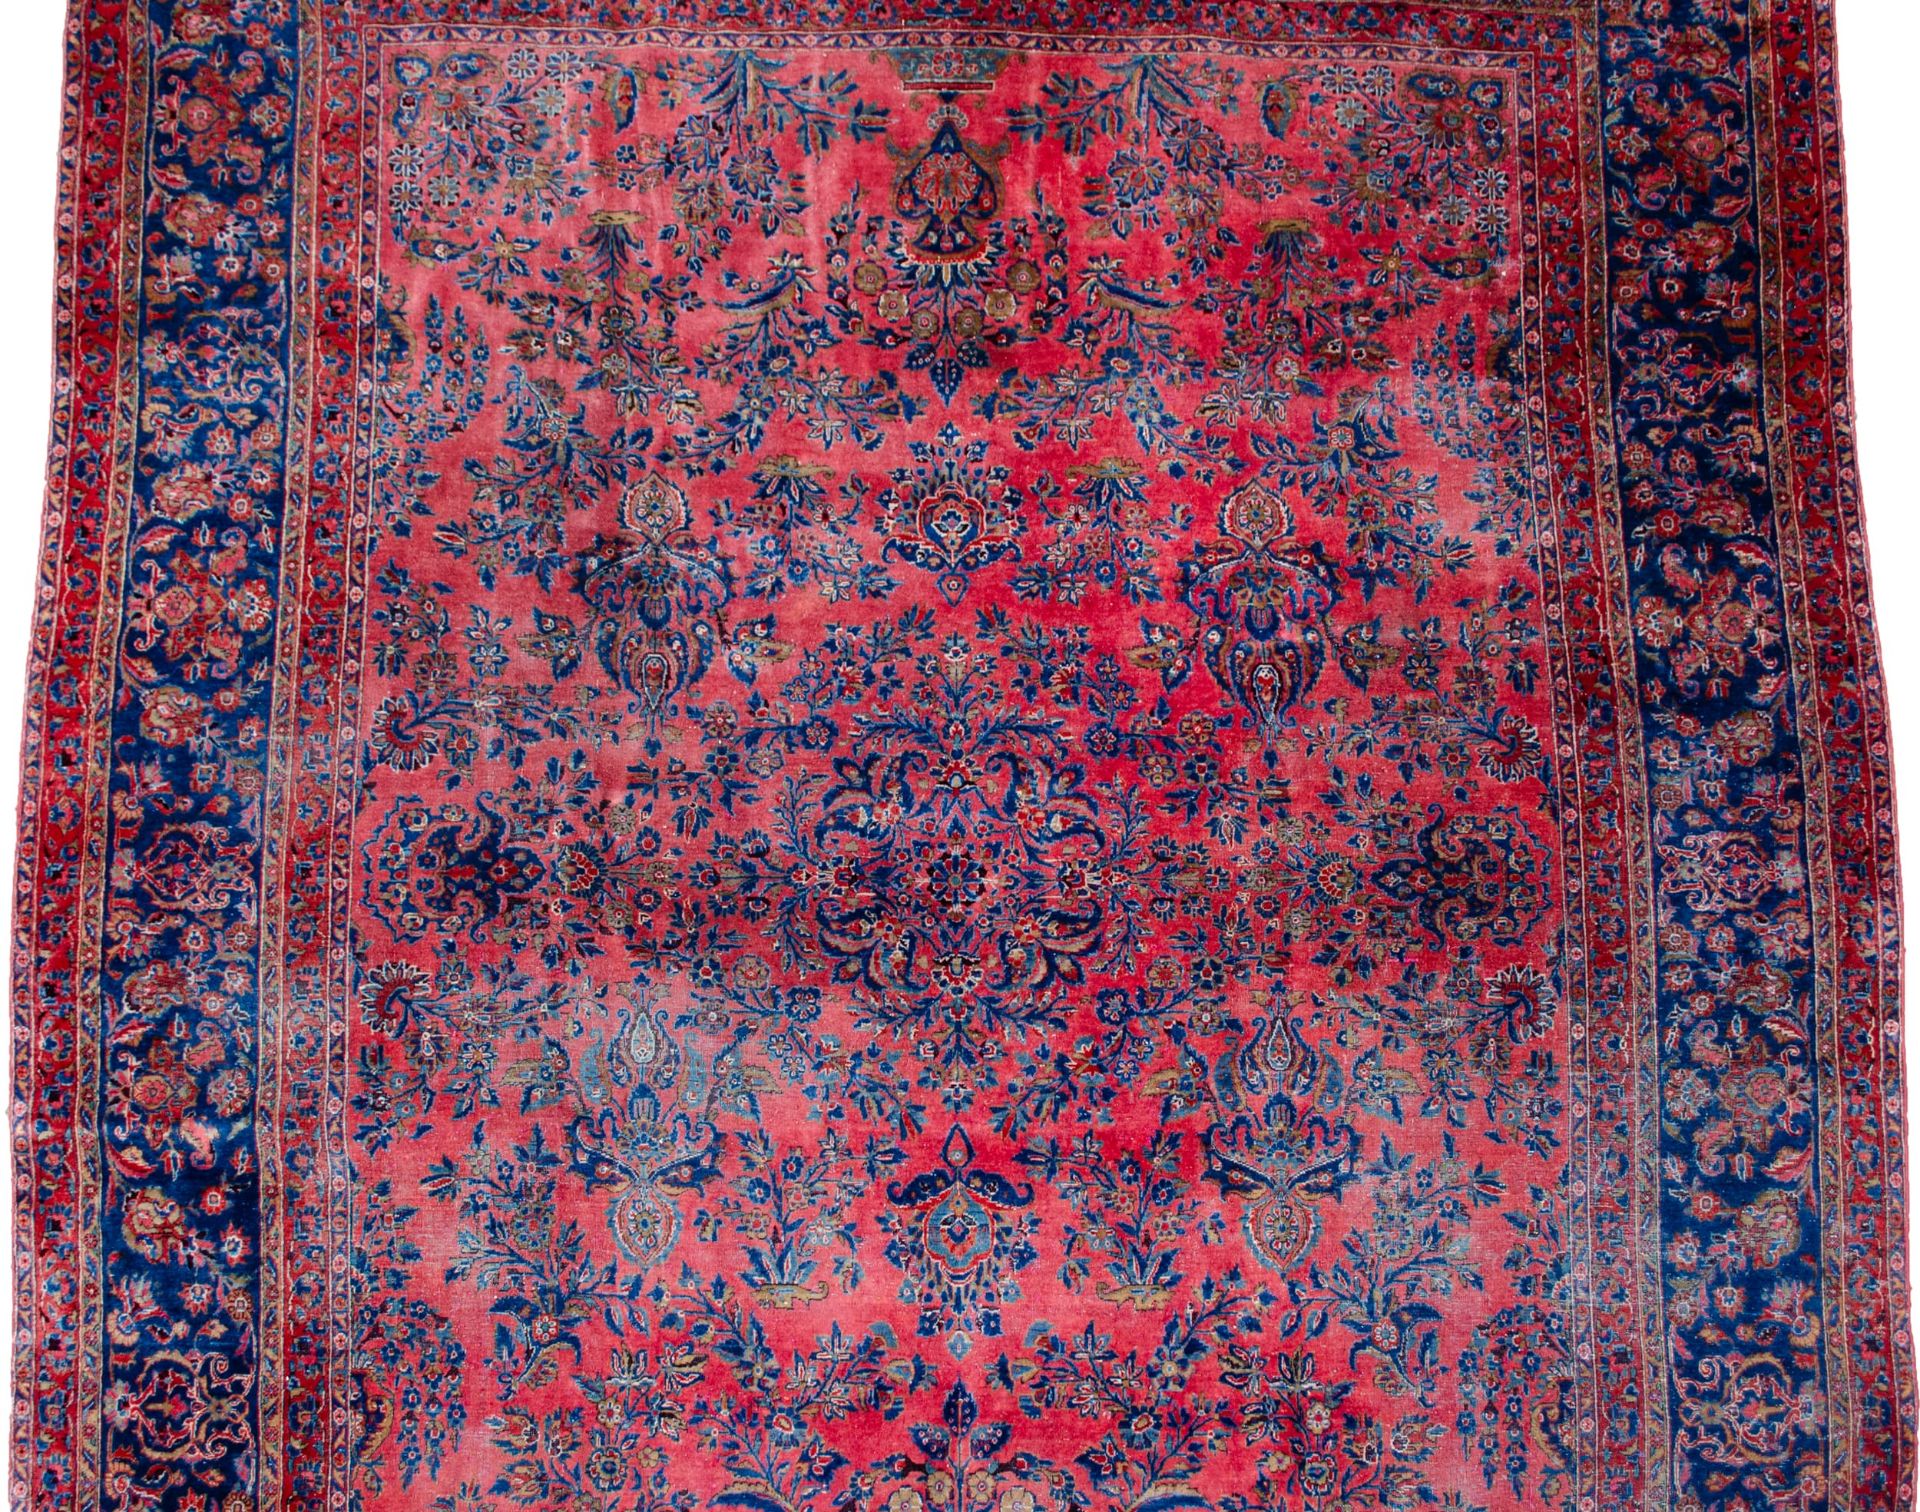 A Kashan carpet, Central Persia, 19th century - Image 6 of 7